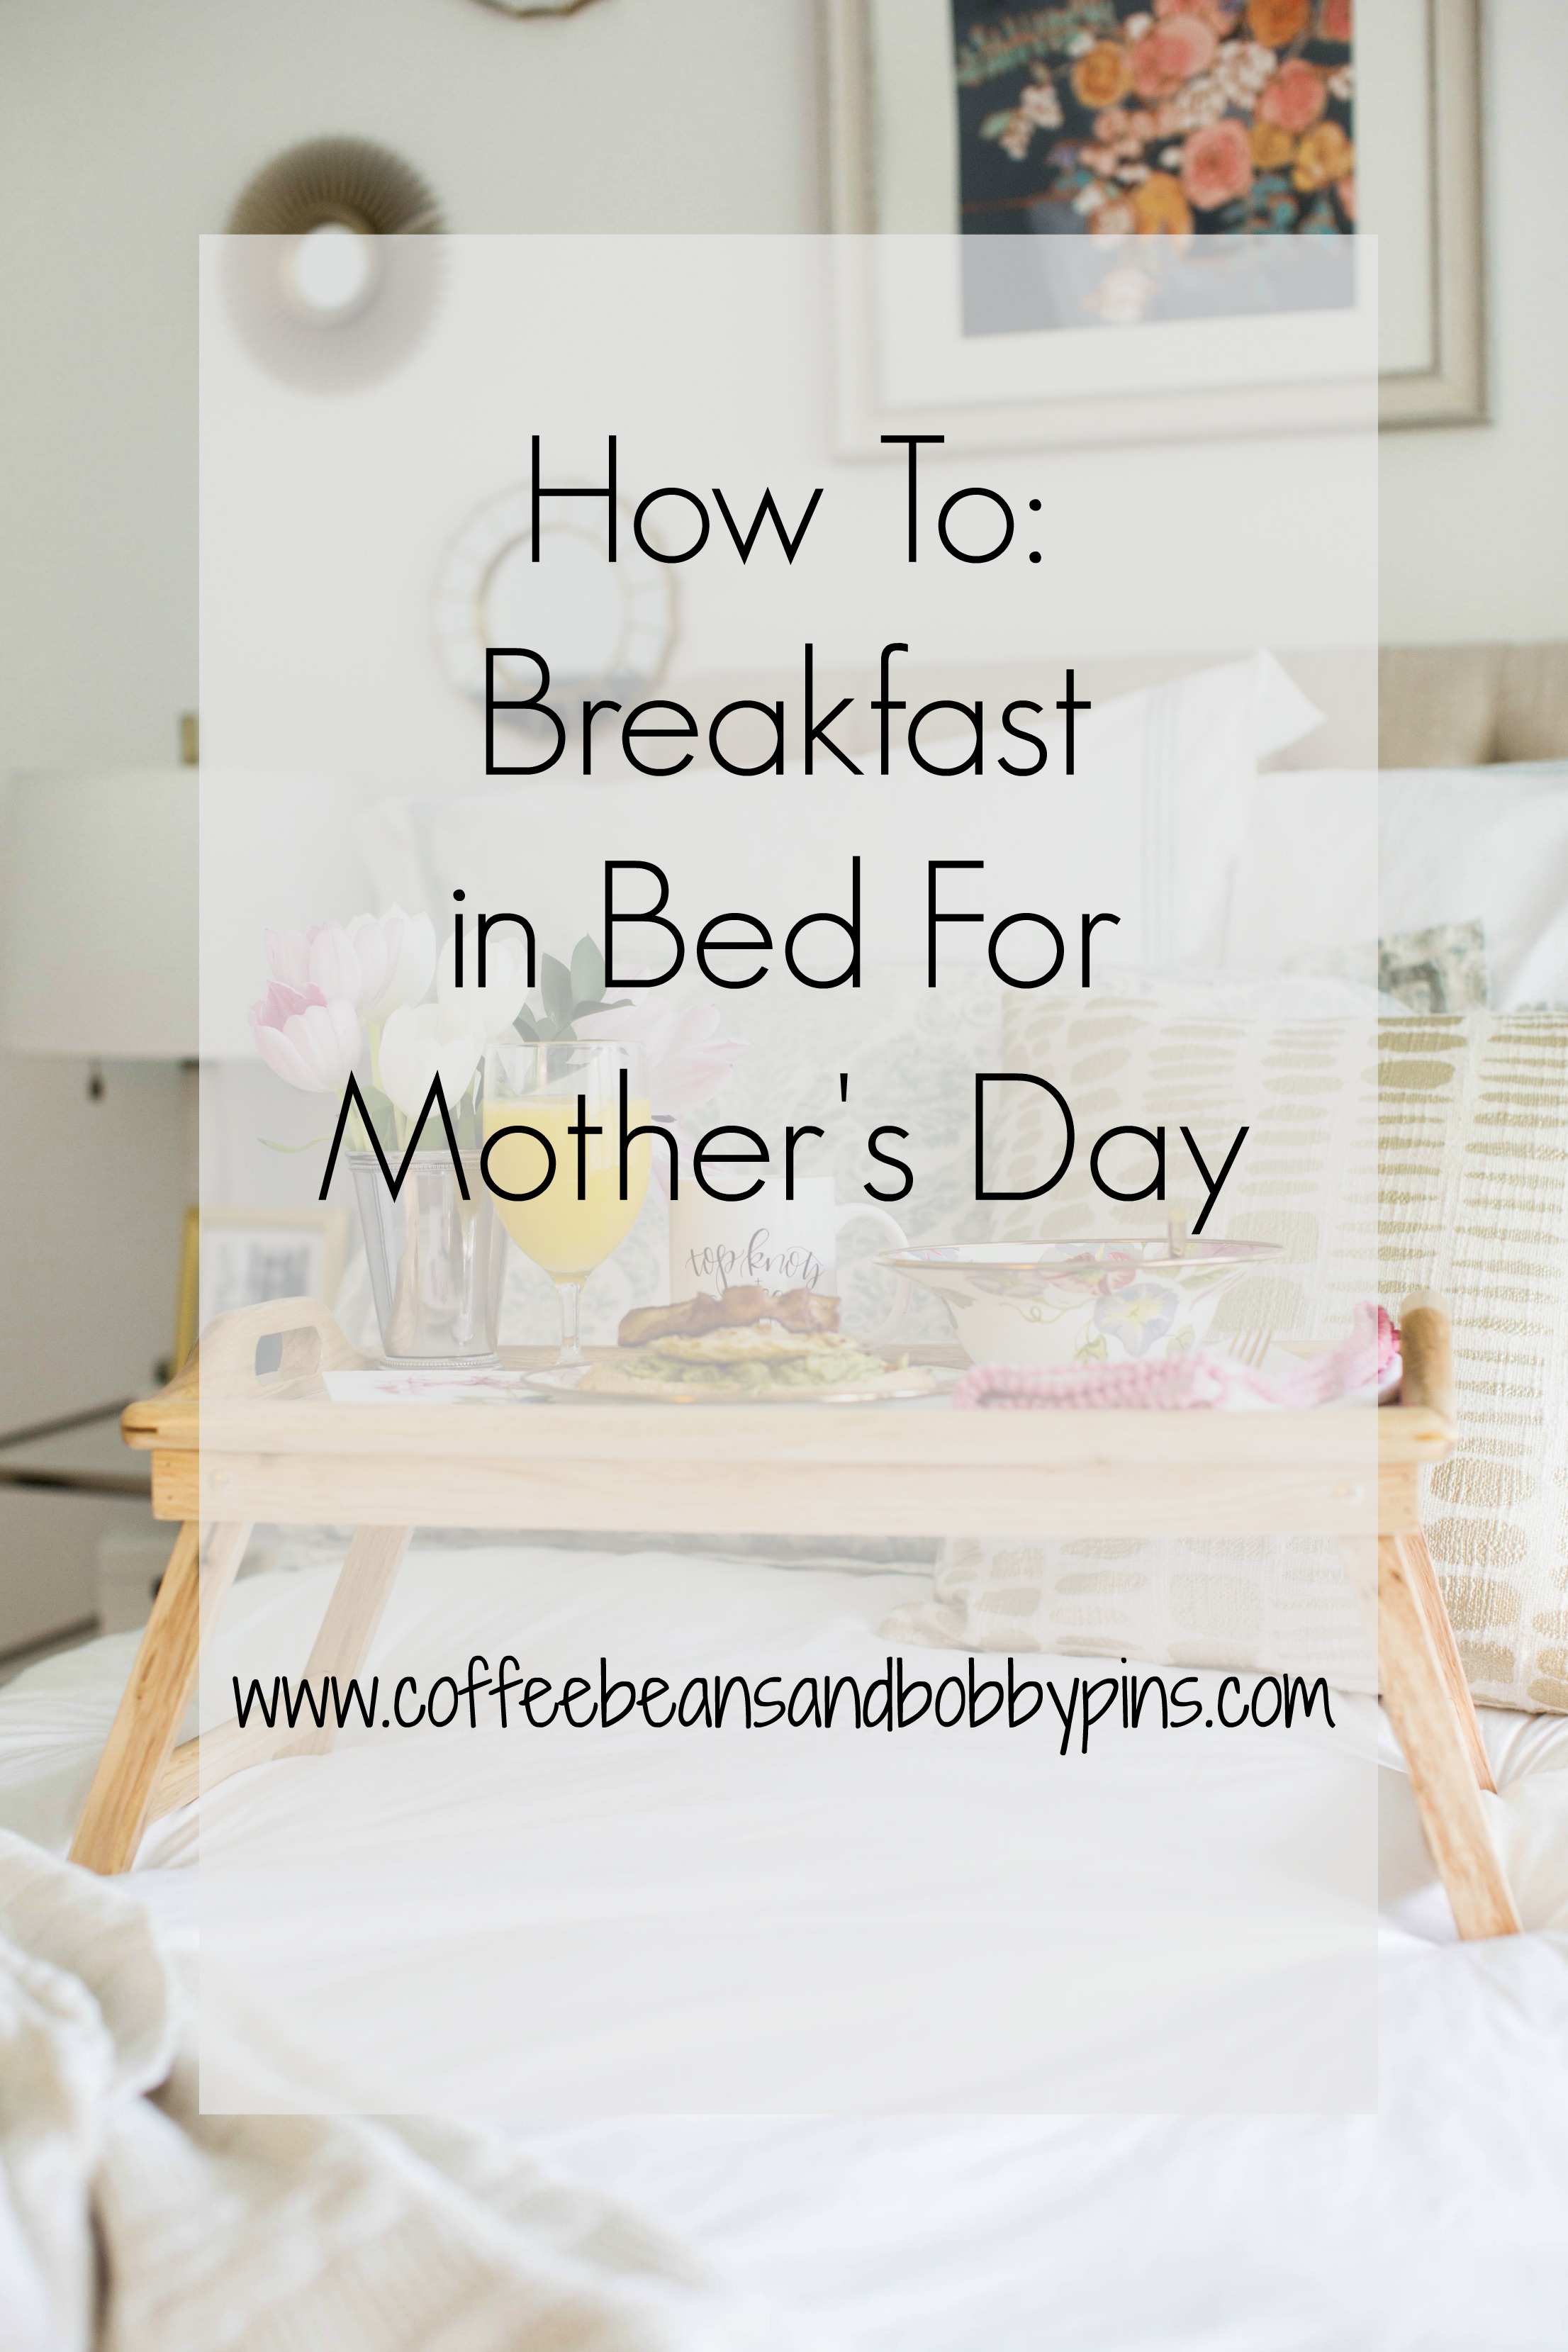 How To: Breakfast in Bed For Mother's Day